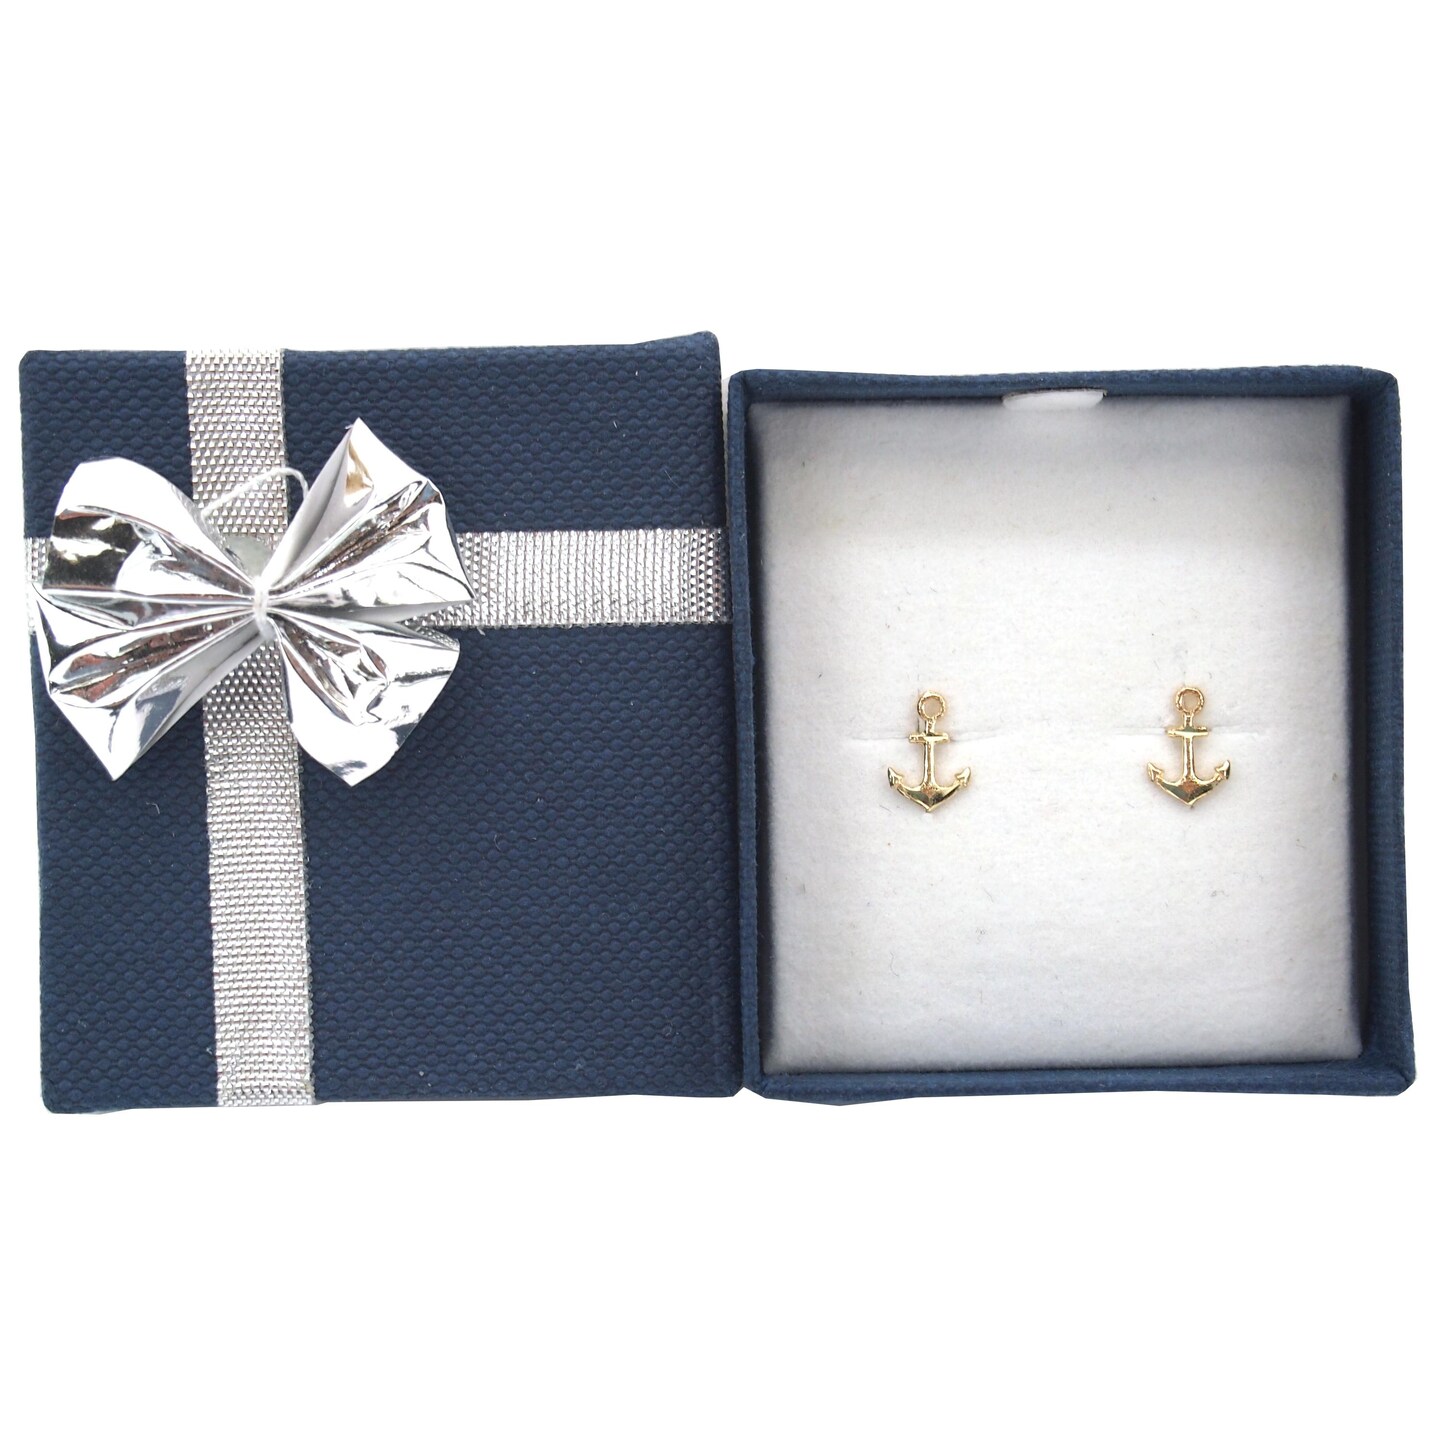 14K Yellow Gold Anchor Earrings with Bow Tie Gift Box